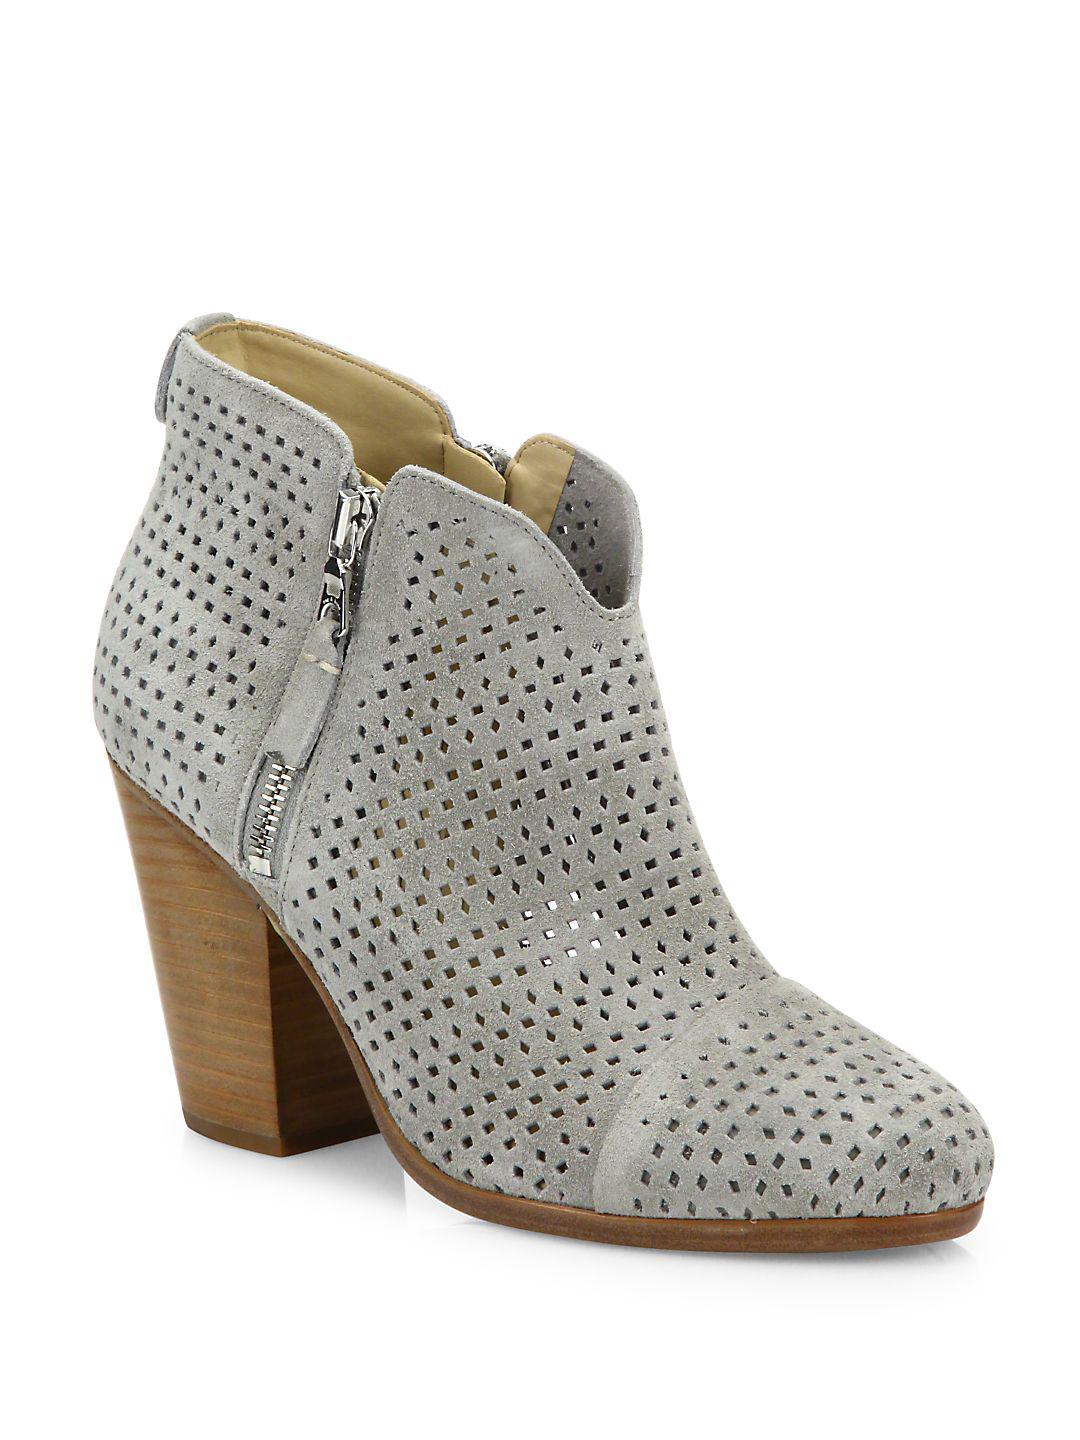 Rag & Bone Suede Ankle Boots in Light Gray (Gray) - Lyst